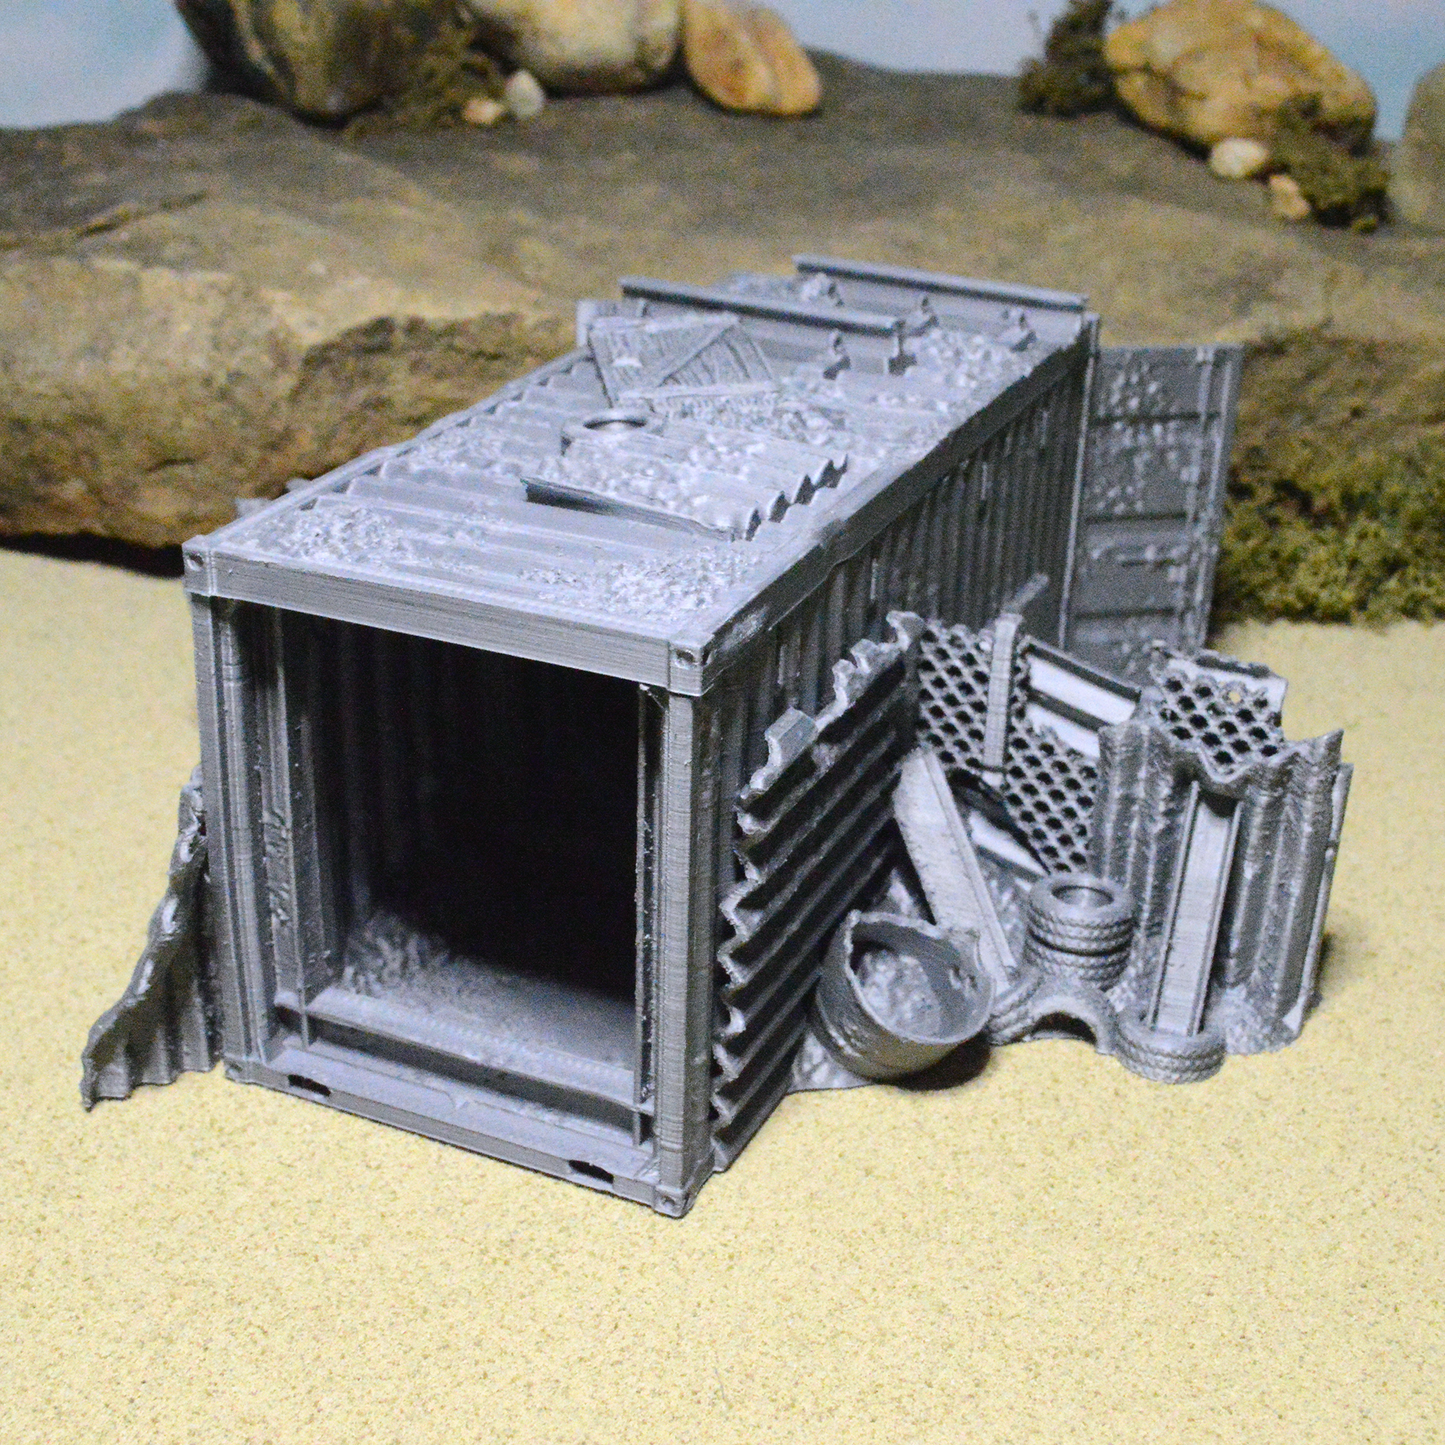 Junkfort Foot Entrance 15mm 20mm 28mm 32mm for Gaslands Terrain, Fallout Urban Apocalyptic Shipping Container Tunnel, This is Not a Test